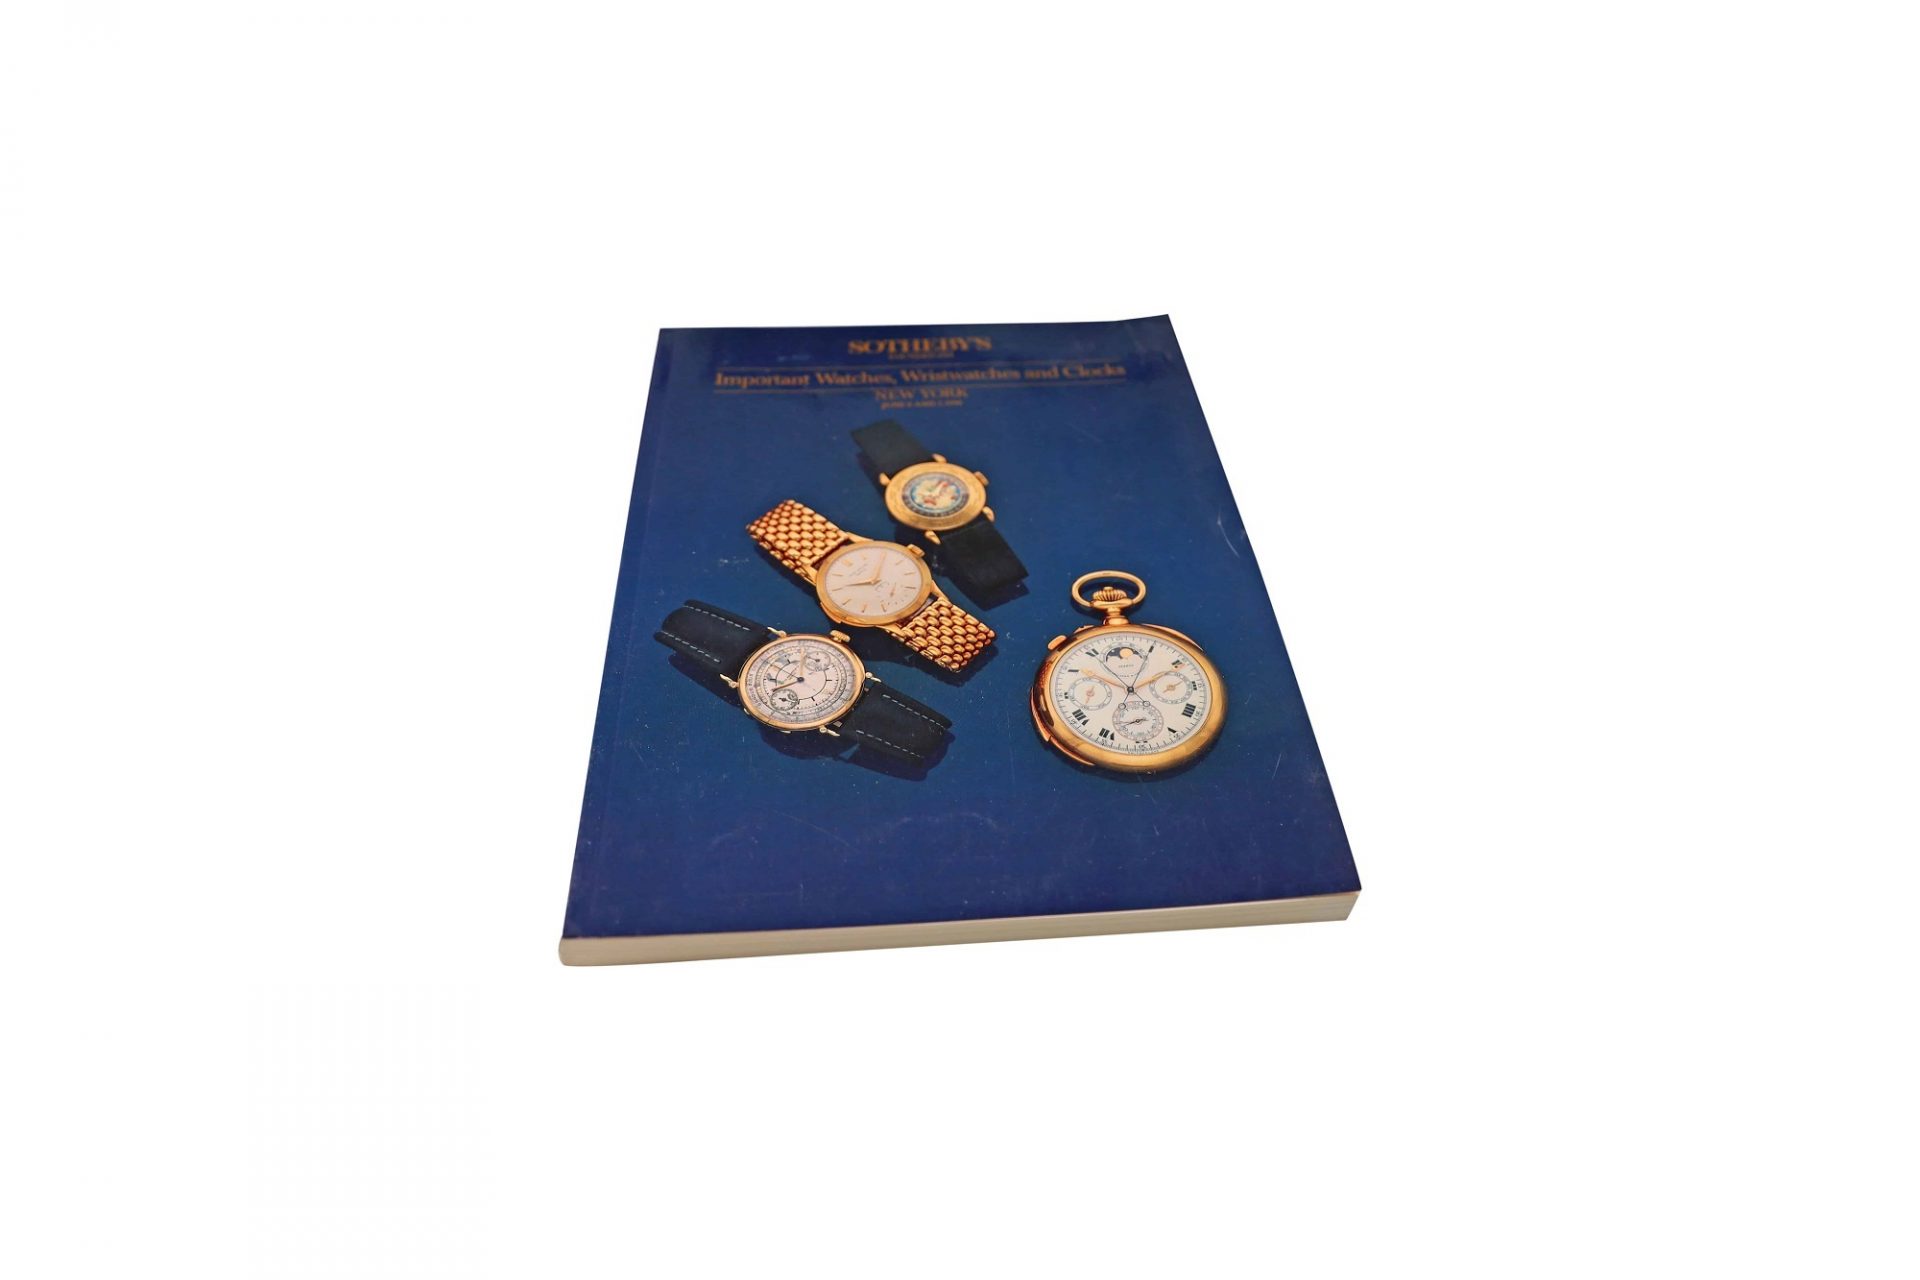 Sotheby's Watches, Wristwatch And Clocks New York Auction Catalog